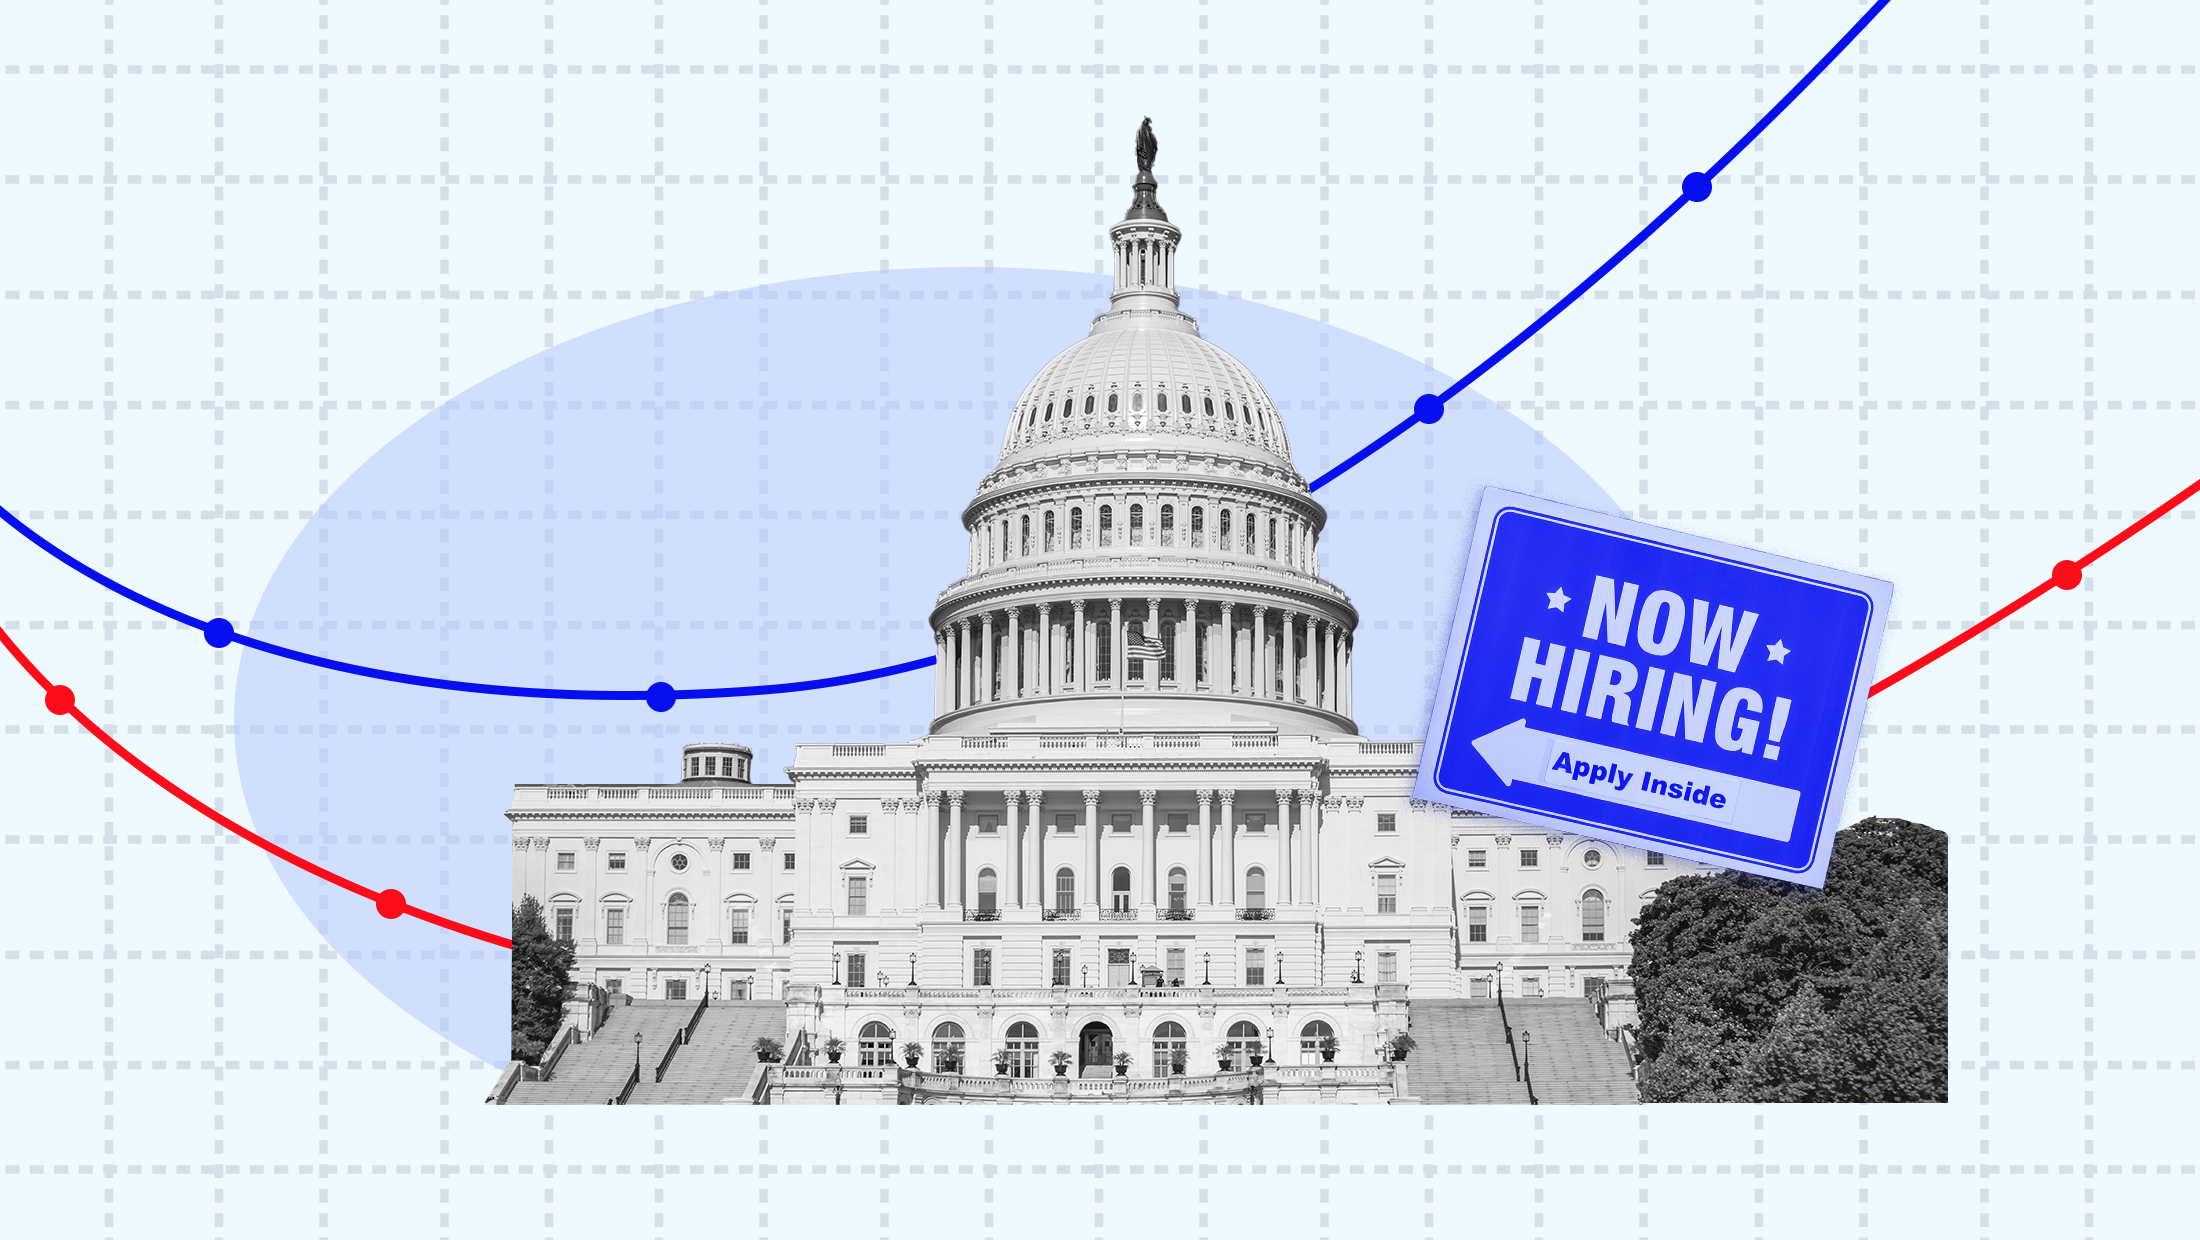 The Capitol Building with a Now Hiring sign mounted on graph paper with rising trend lines.